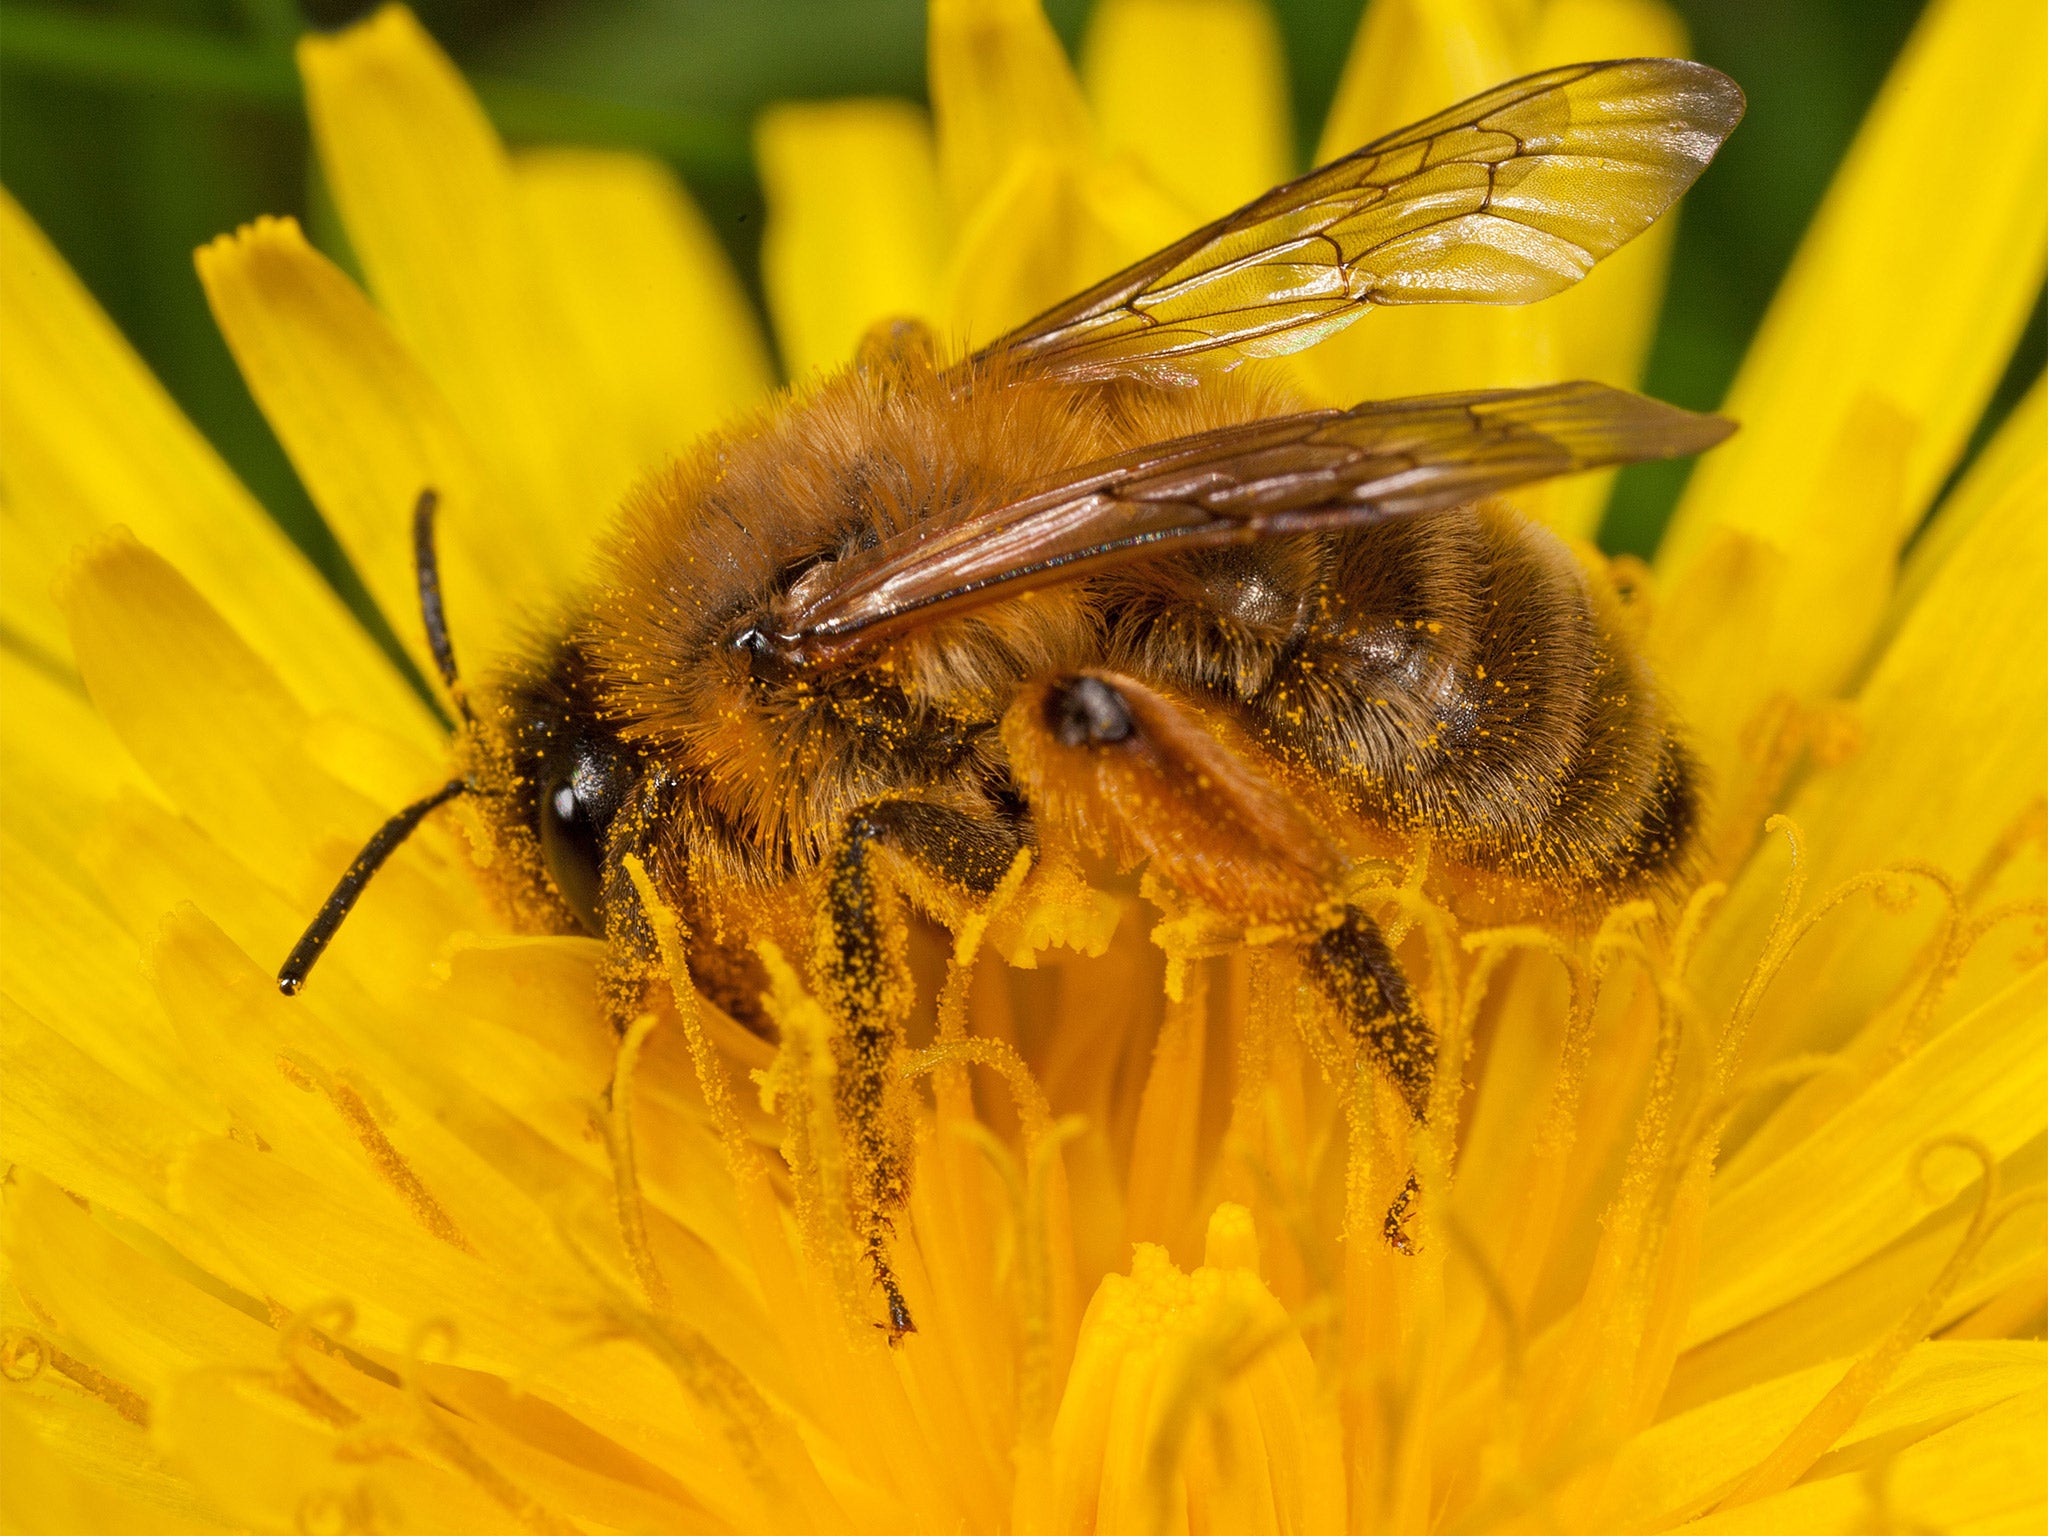 Gardeners have been called on to boost bee populations by mowing their lawns less often